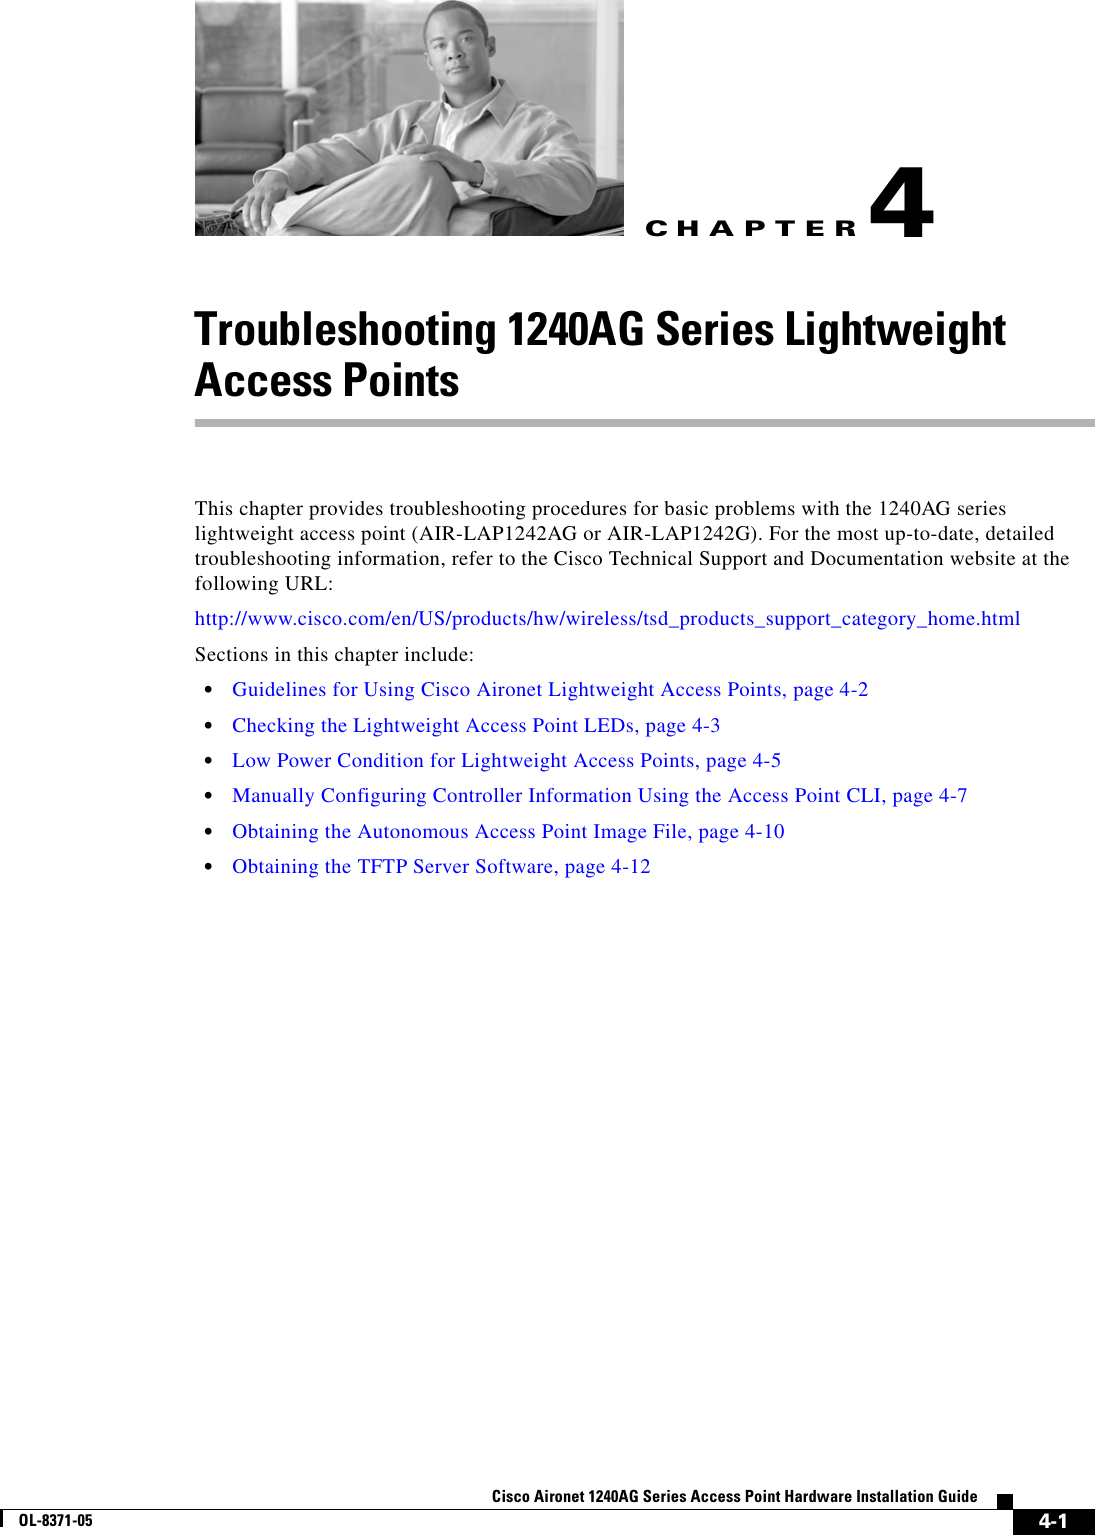 CHAPTER 4-1Cisco Aironet 1240AG Series Access Point Hardware Installation GuideOL-8371-054Troubleshooting 1240AG Series Lightweight Access PointsThis chapter provides troubleshooting procedures for basic problems with the 1240AG series lightweight access point (AIR-LAP1242AG or AIR-LAP1242G). For the most up-to-date, detailed troubleshooting information, refer to the Cisco Technical Support and Documentation website at the following URL:http://www.cisco.com/en/US/products/hw/wireless/tsd_products_support_category_home.htmlSections in this chapter include:•Guidelines for Using Cisco Aironet Lightweight Access Points, page 4-2•Checking the Lightweight Access Point LEDs, page 4-3•Low Power Condition for Lightweight Access Points, page 4-5•Manually Configuring Controller Information Using the Access Point CLI, page 4-7•Obtaining the Autonomous Access Point Image File, page 4-10•Obtaining the TFTP Server Software, page 4-12